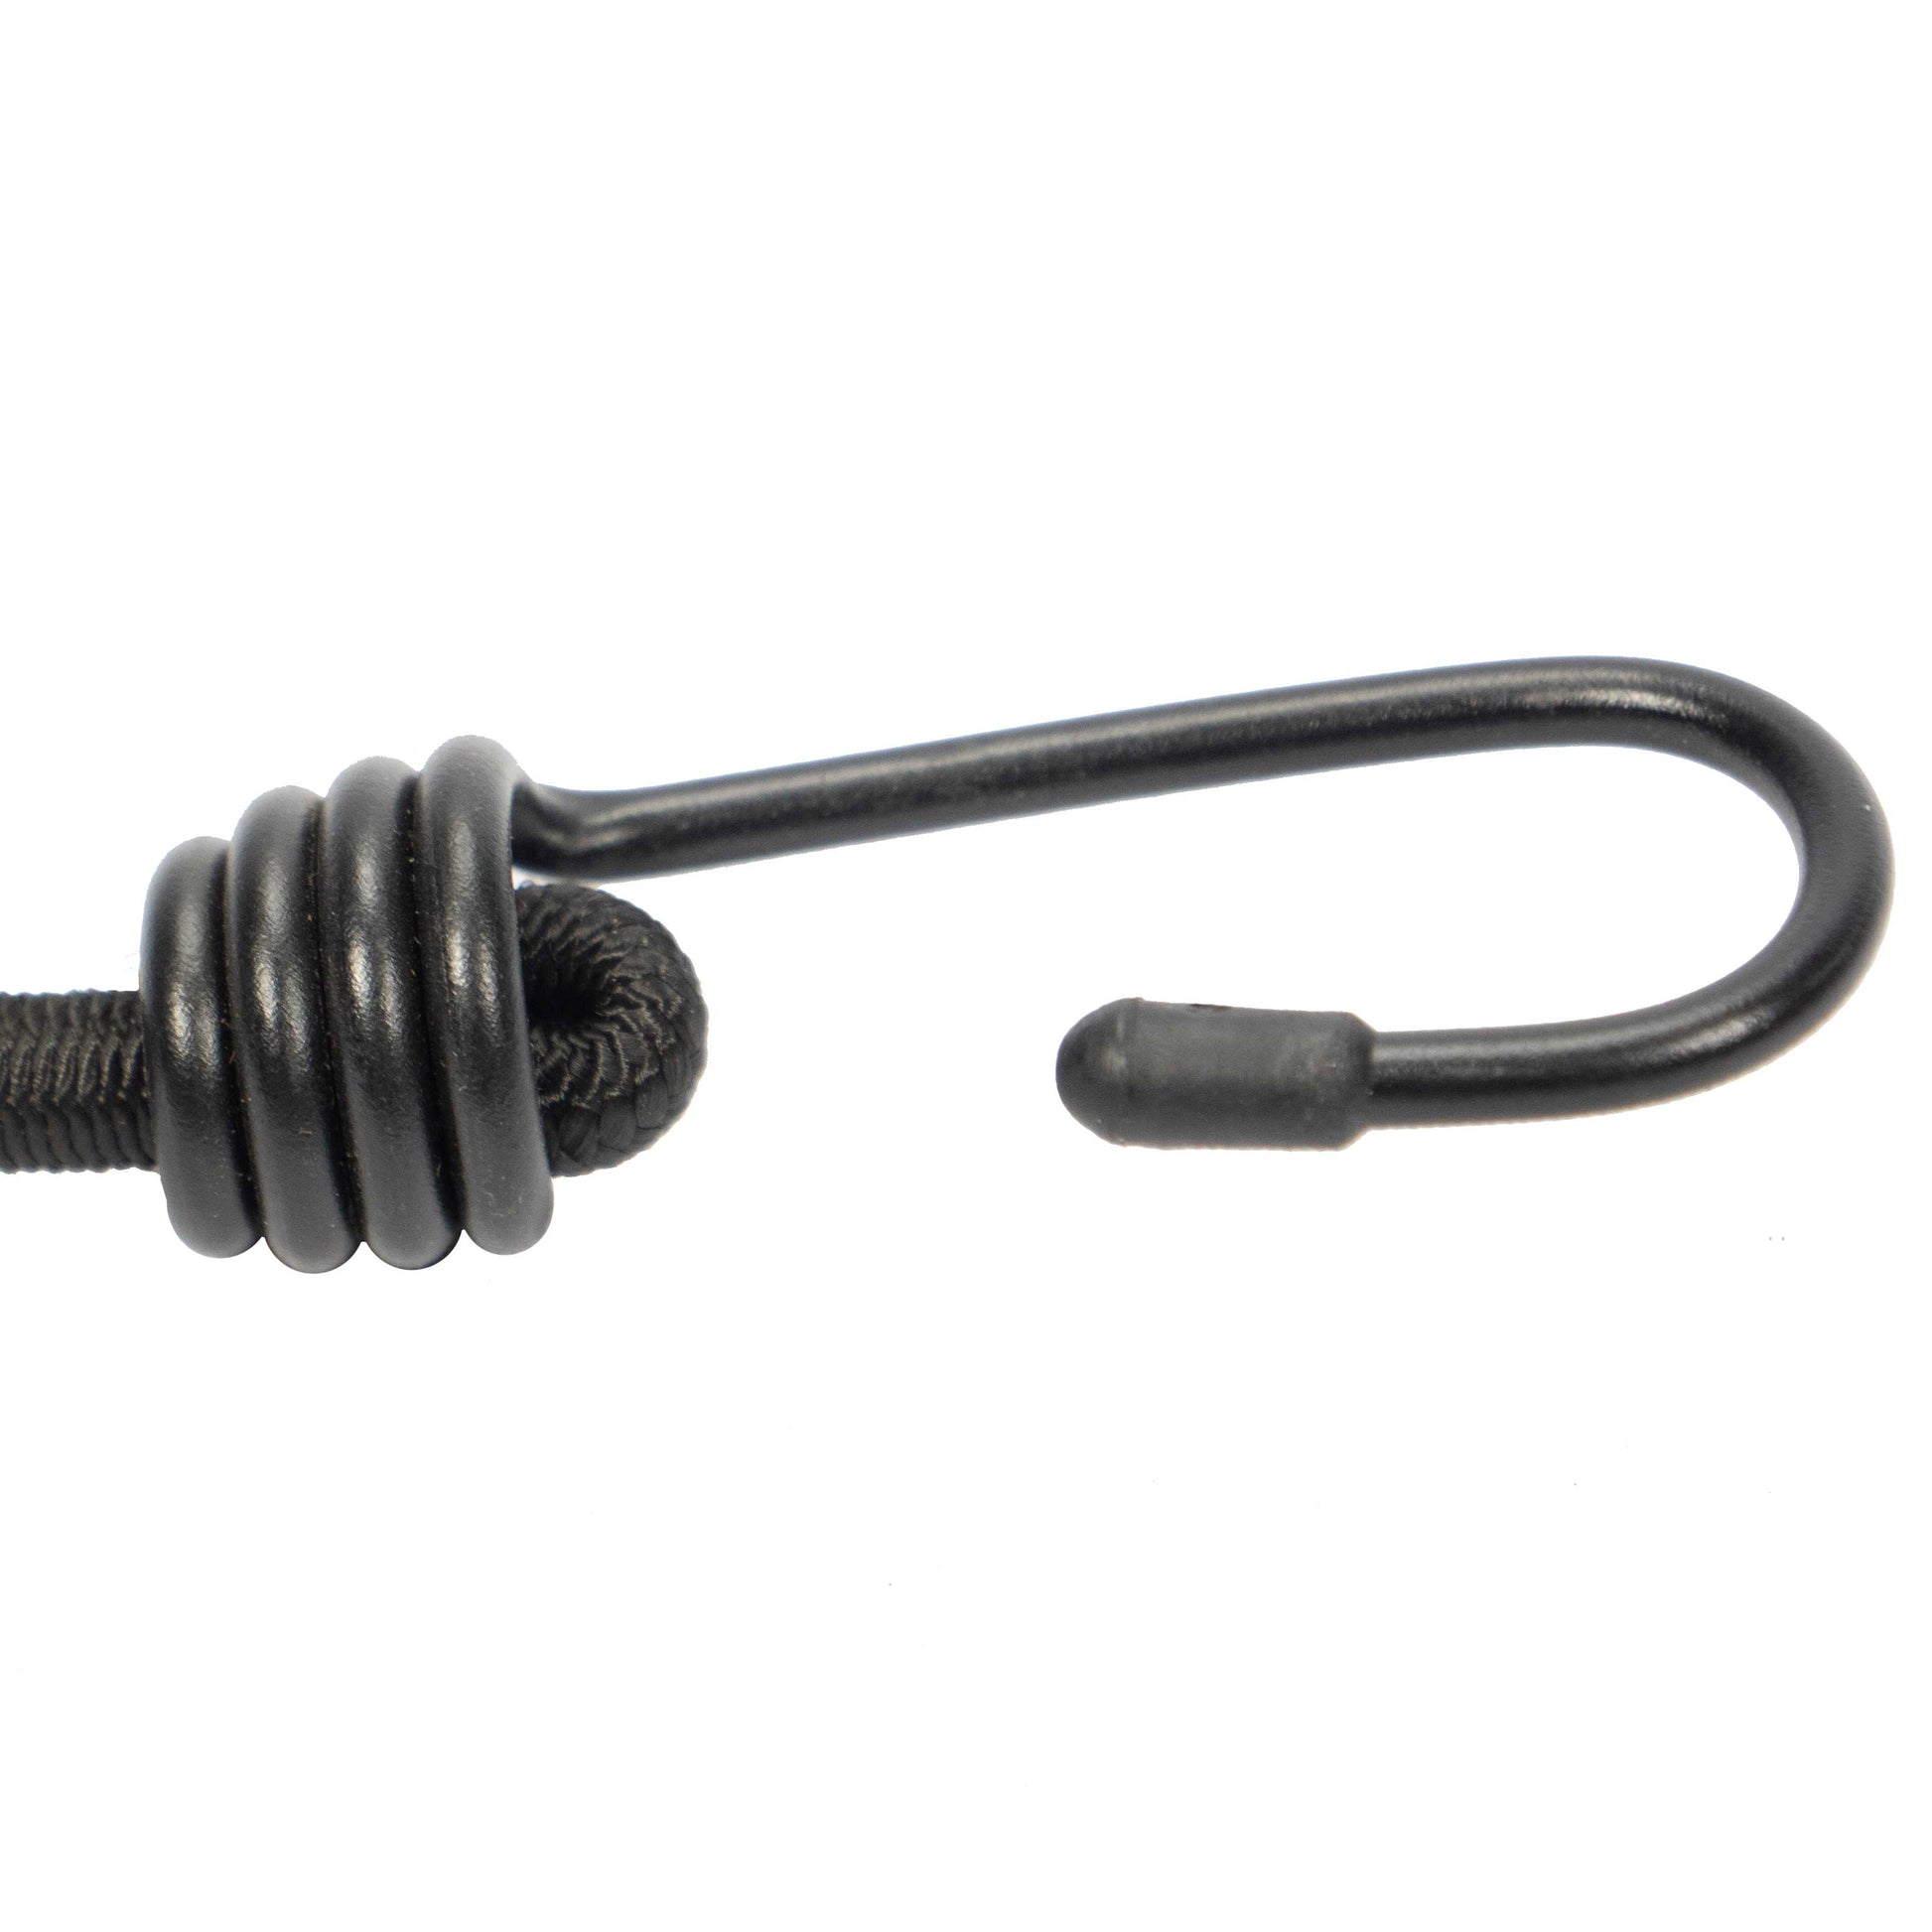 516 inch x 12 inch Black Bungee Cords (bundle of 25) 8mm image 1 of 8 image 2 of 8 image 3 of 8